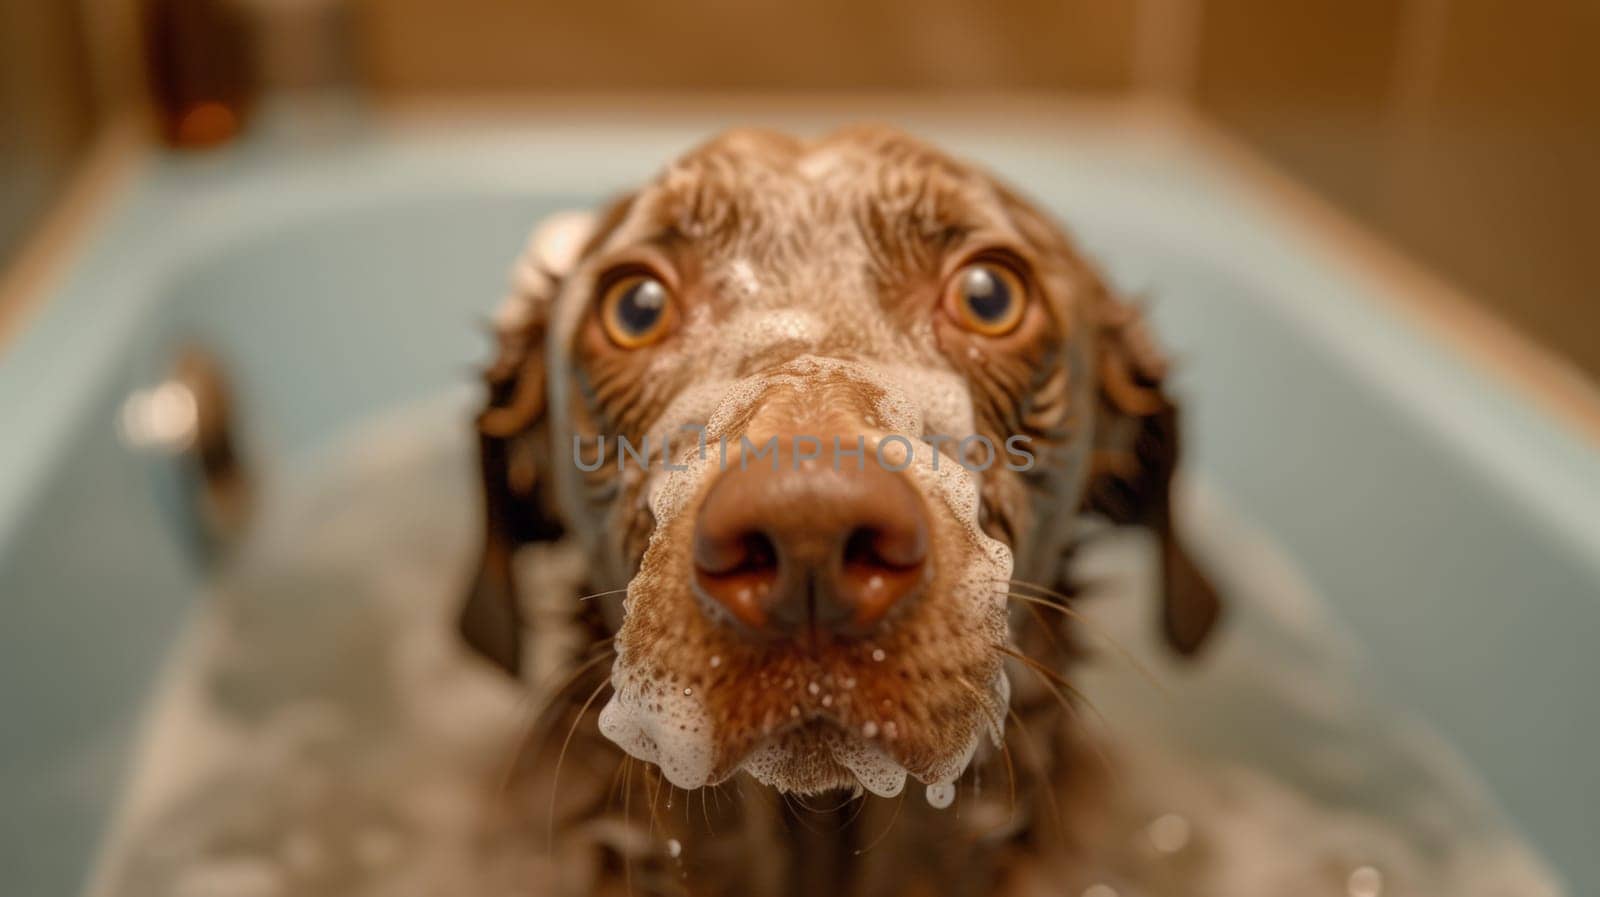 A dog in a bathtub with water and soap on his face